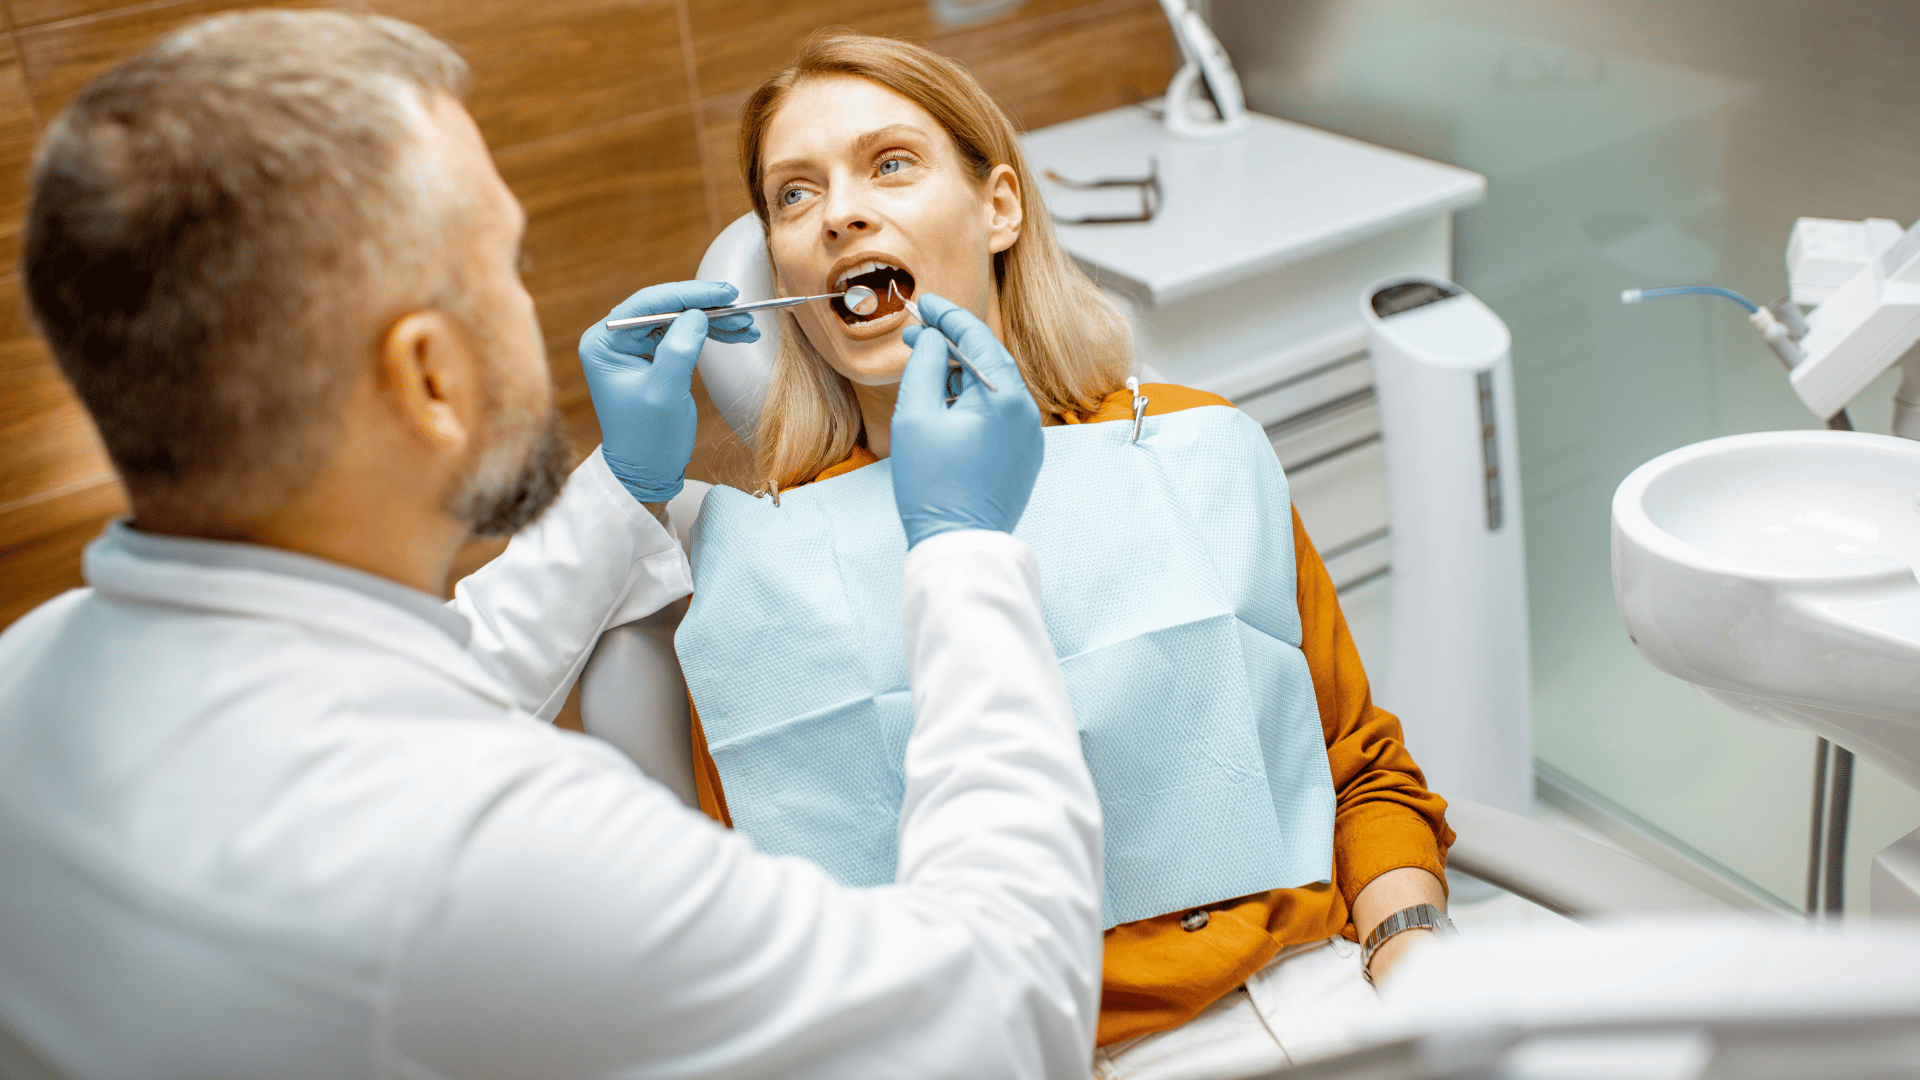 Emergency Dental Care: What to Do when emergency happened